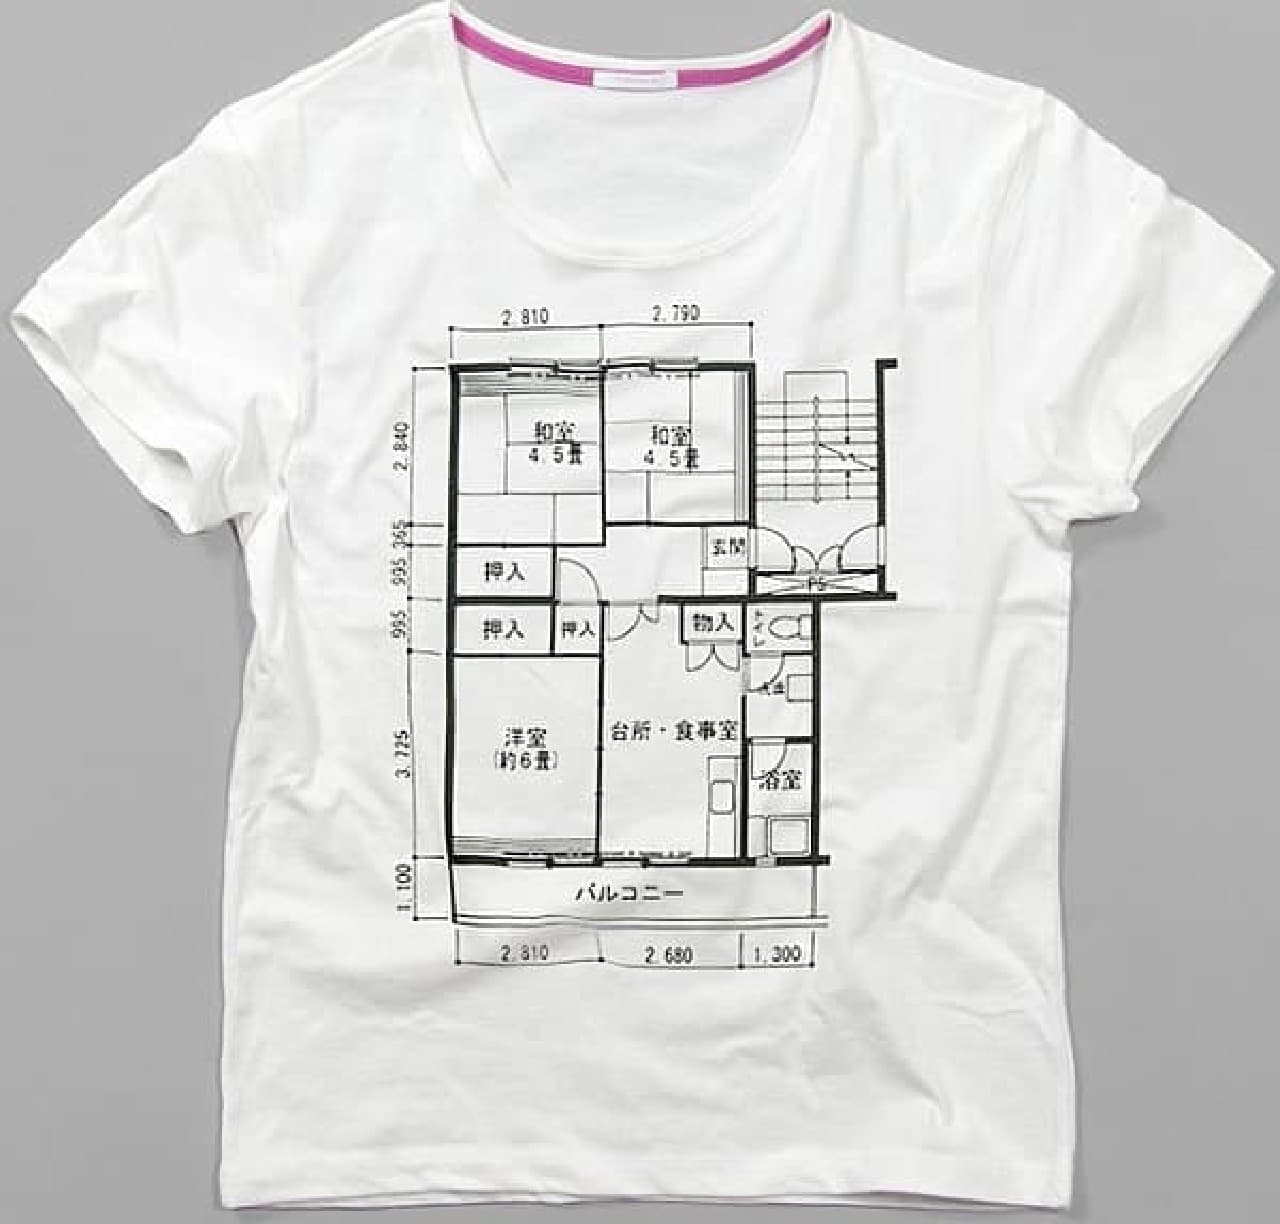 Recommended for floor plan enthusiasts! "Japanese floor plan T-shirt"